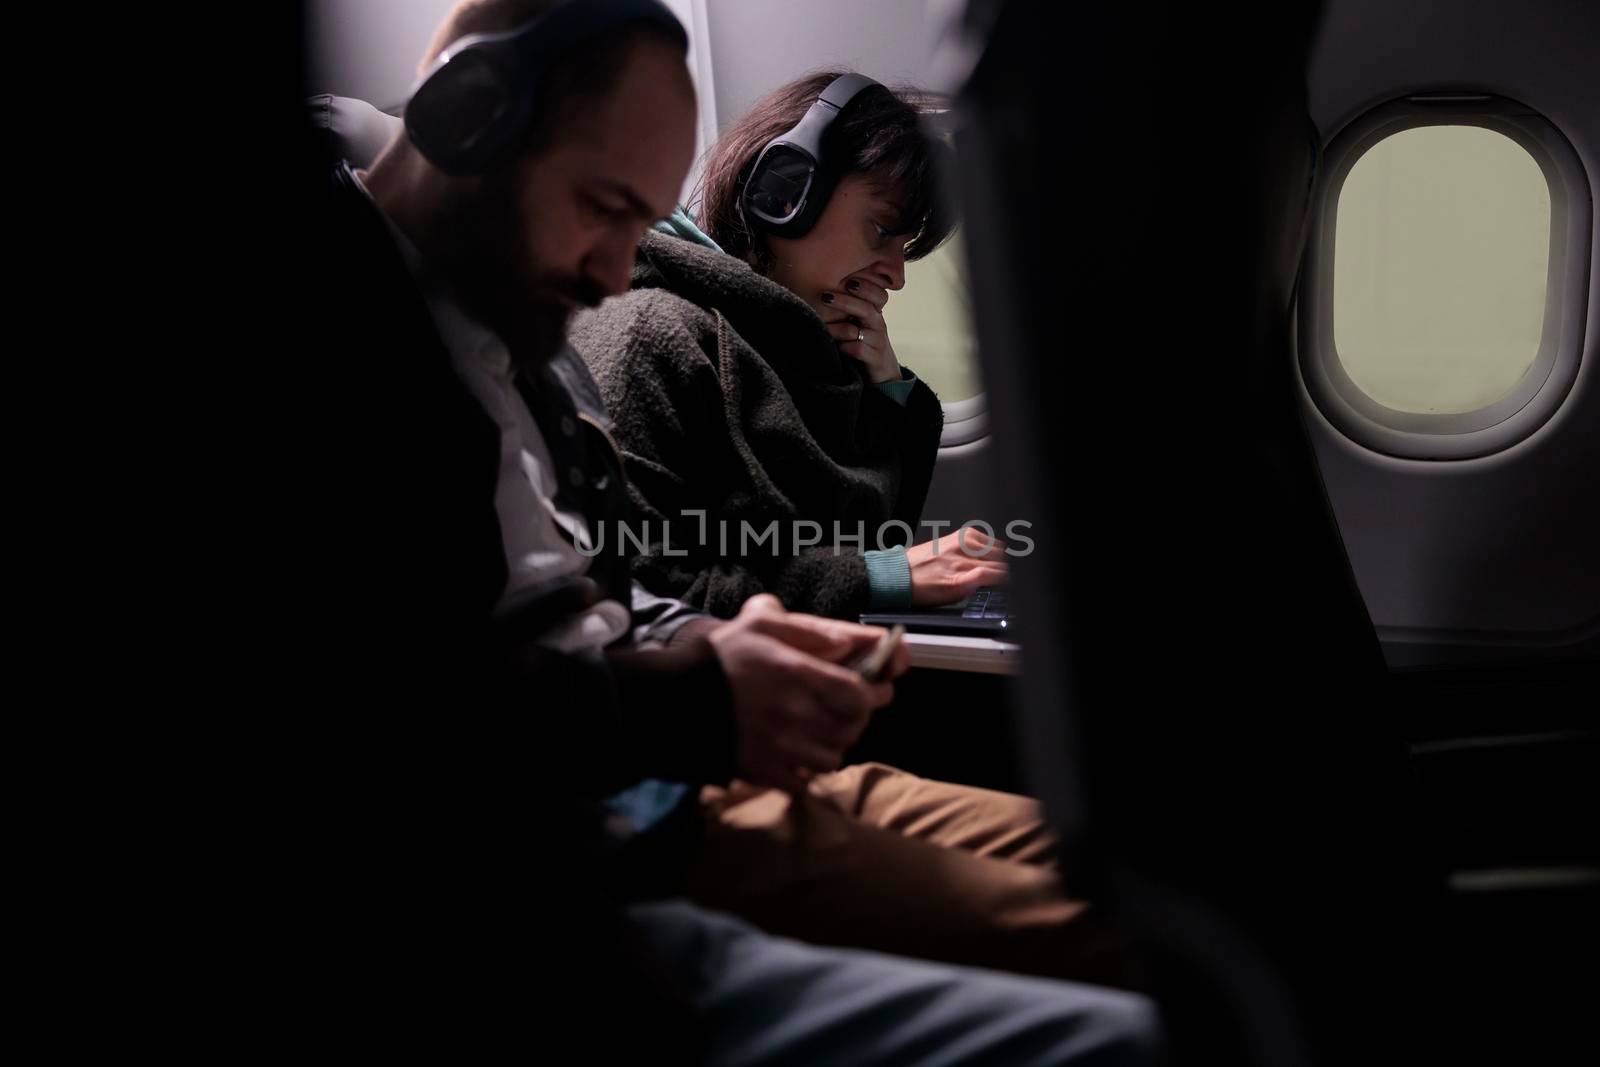 Group of passengers flying together on plane in economy class by DCStudio